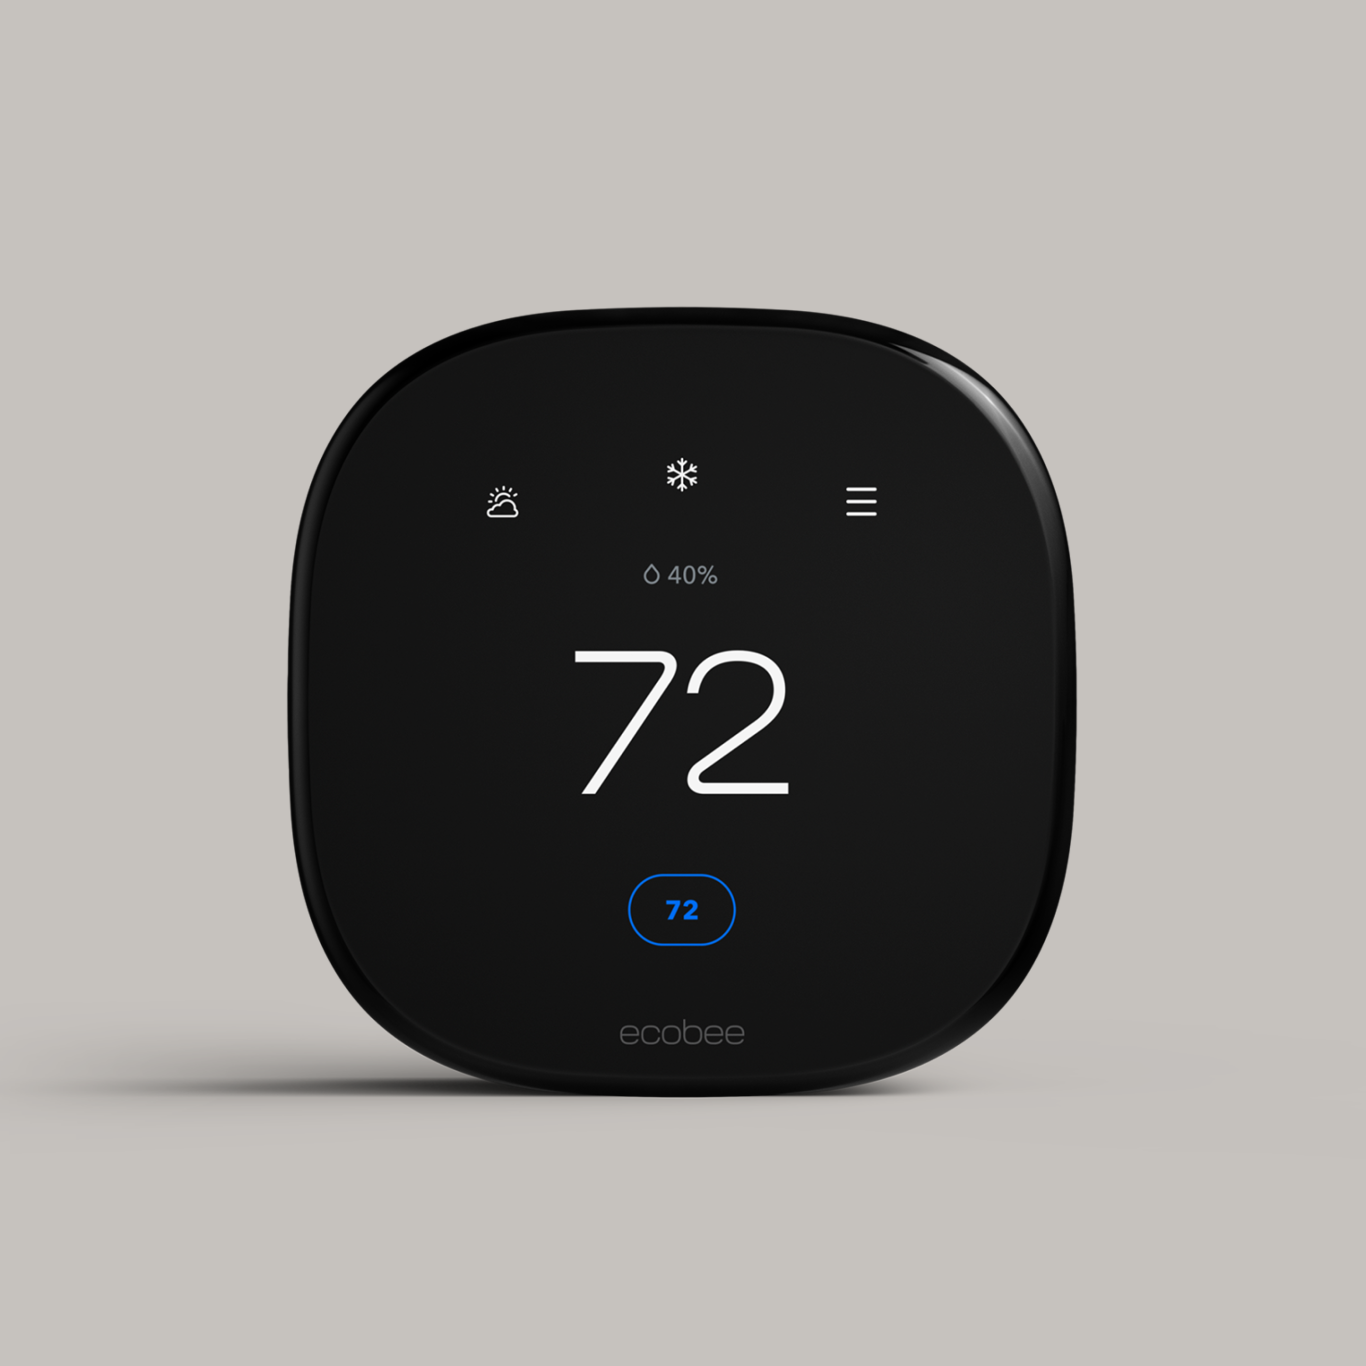 ecobee smart thermostat enhanced on a grey background